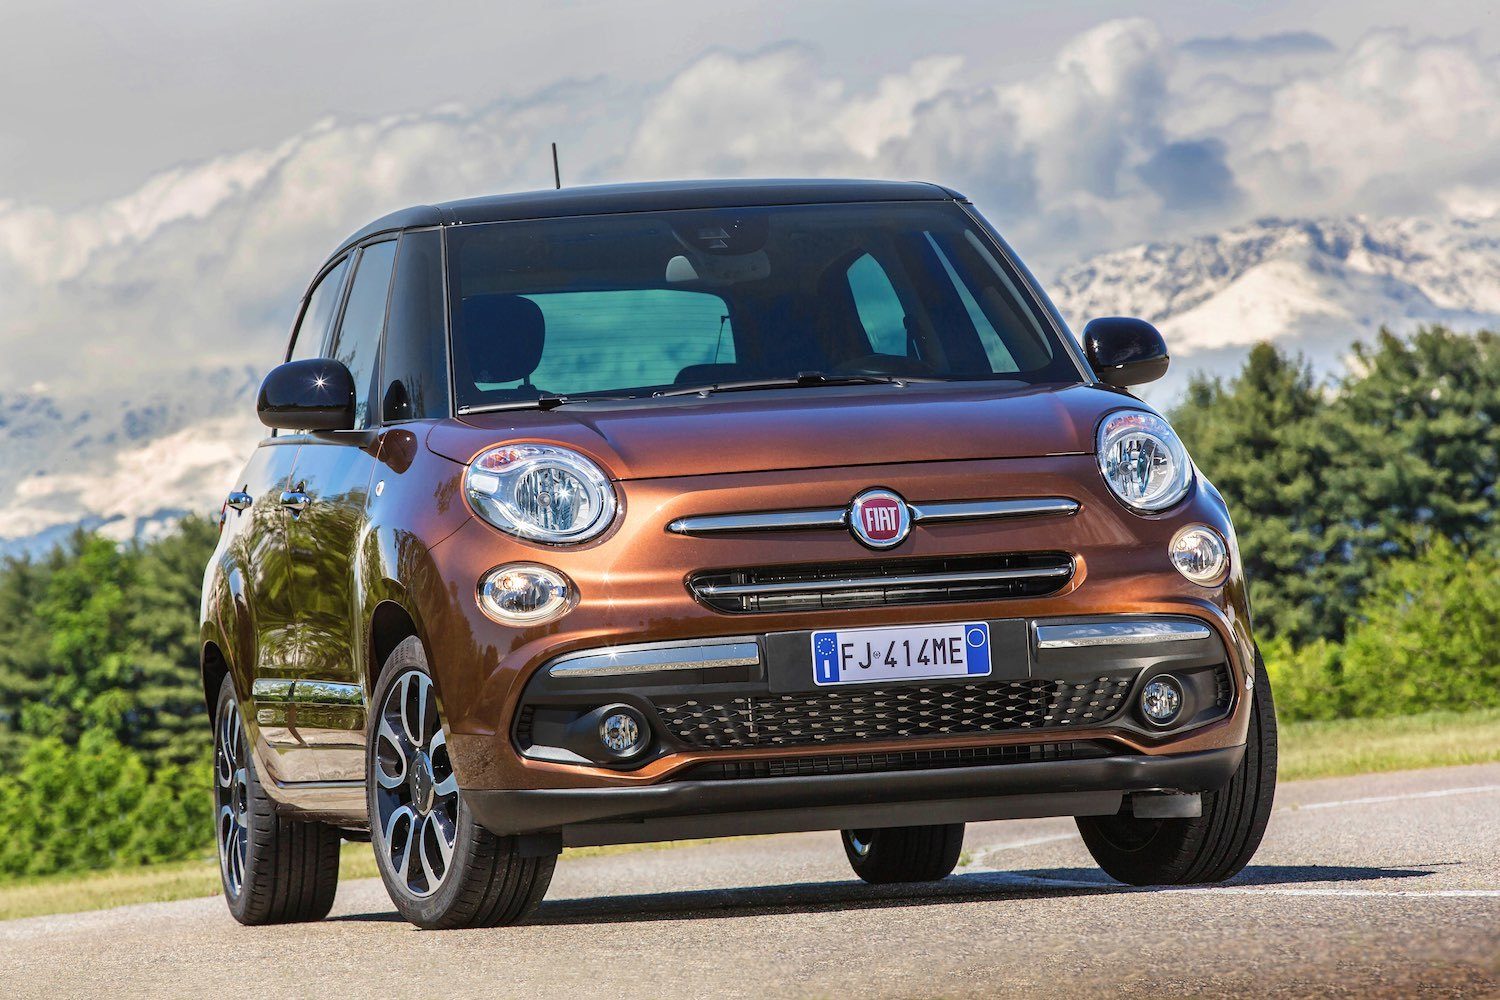 Tim Barnes-Clay reviews the New Fiat 500L from the first drive in Italy 7